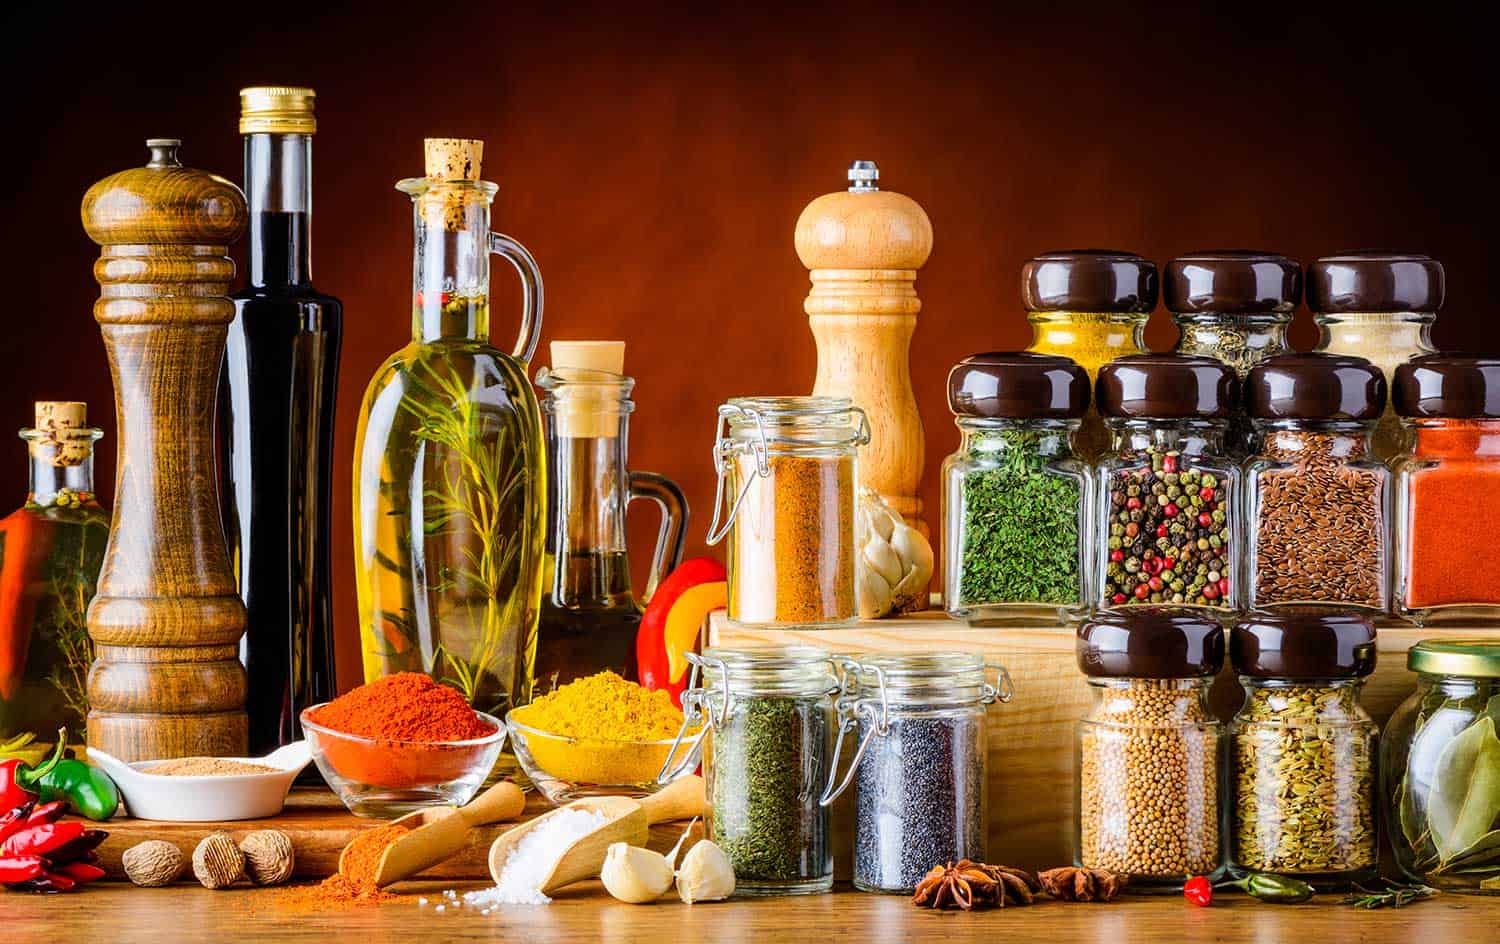 Bottles of oil and Balsamic vinegar and different spices and seeds and cooking ingredients